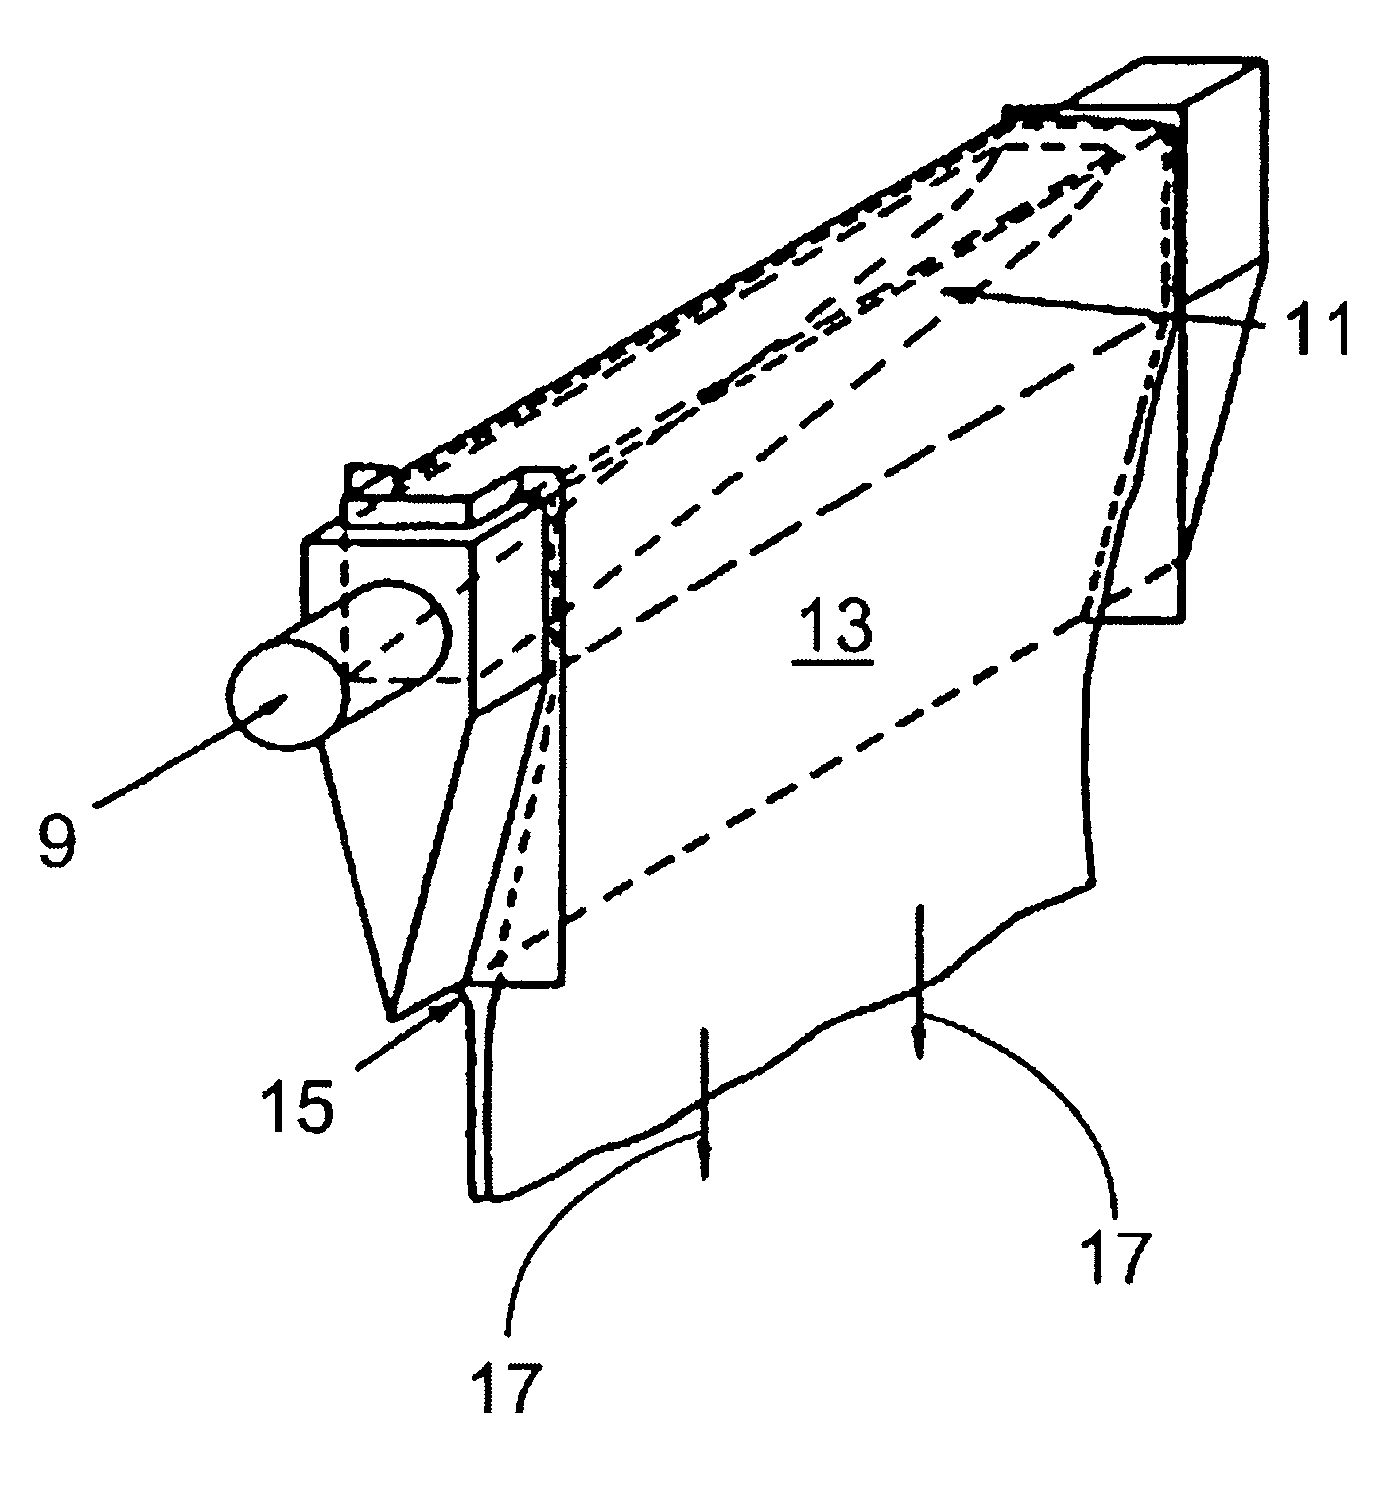 Refractory ceramic composite and method of making